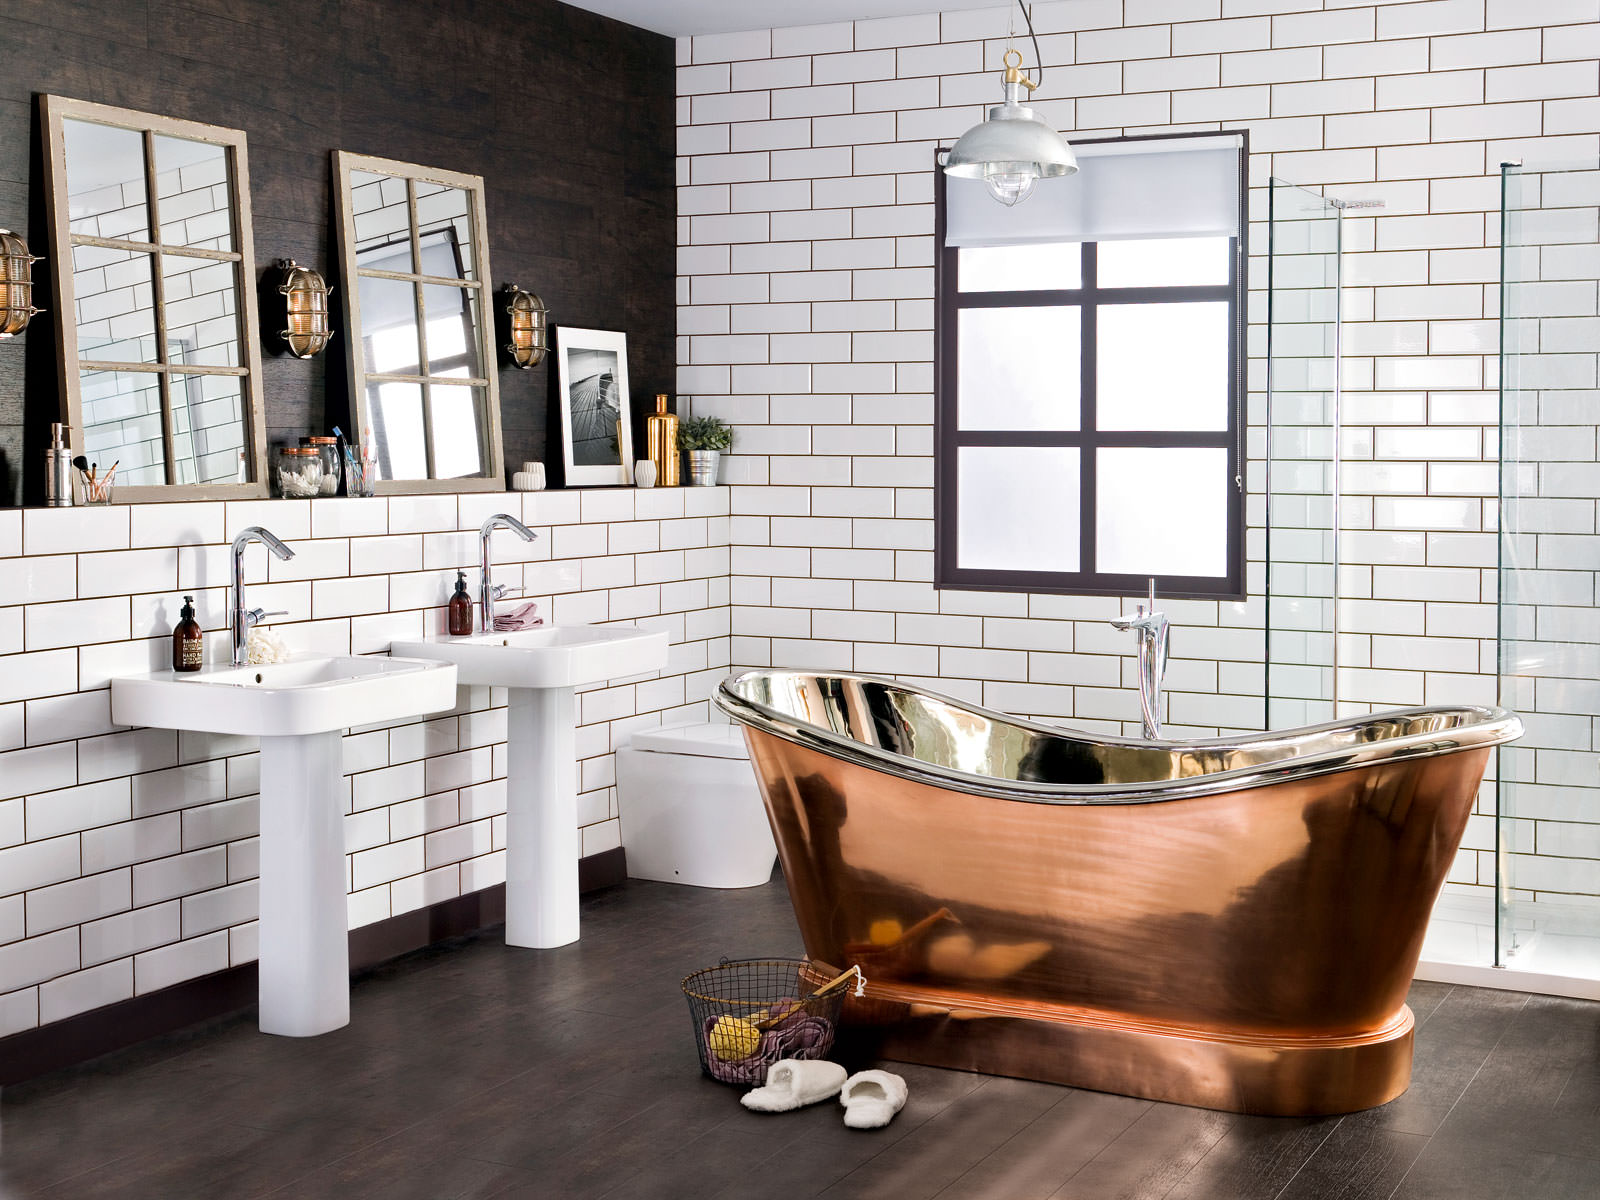 Copper alloy bathtub in a room with white tiled walls